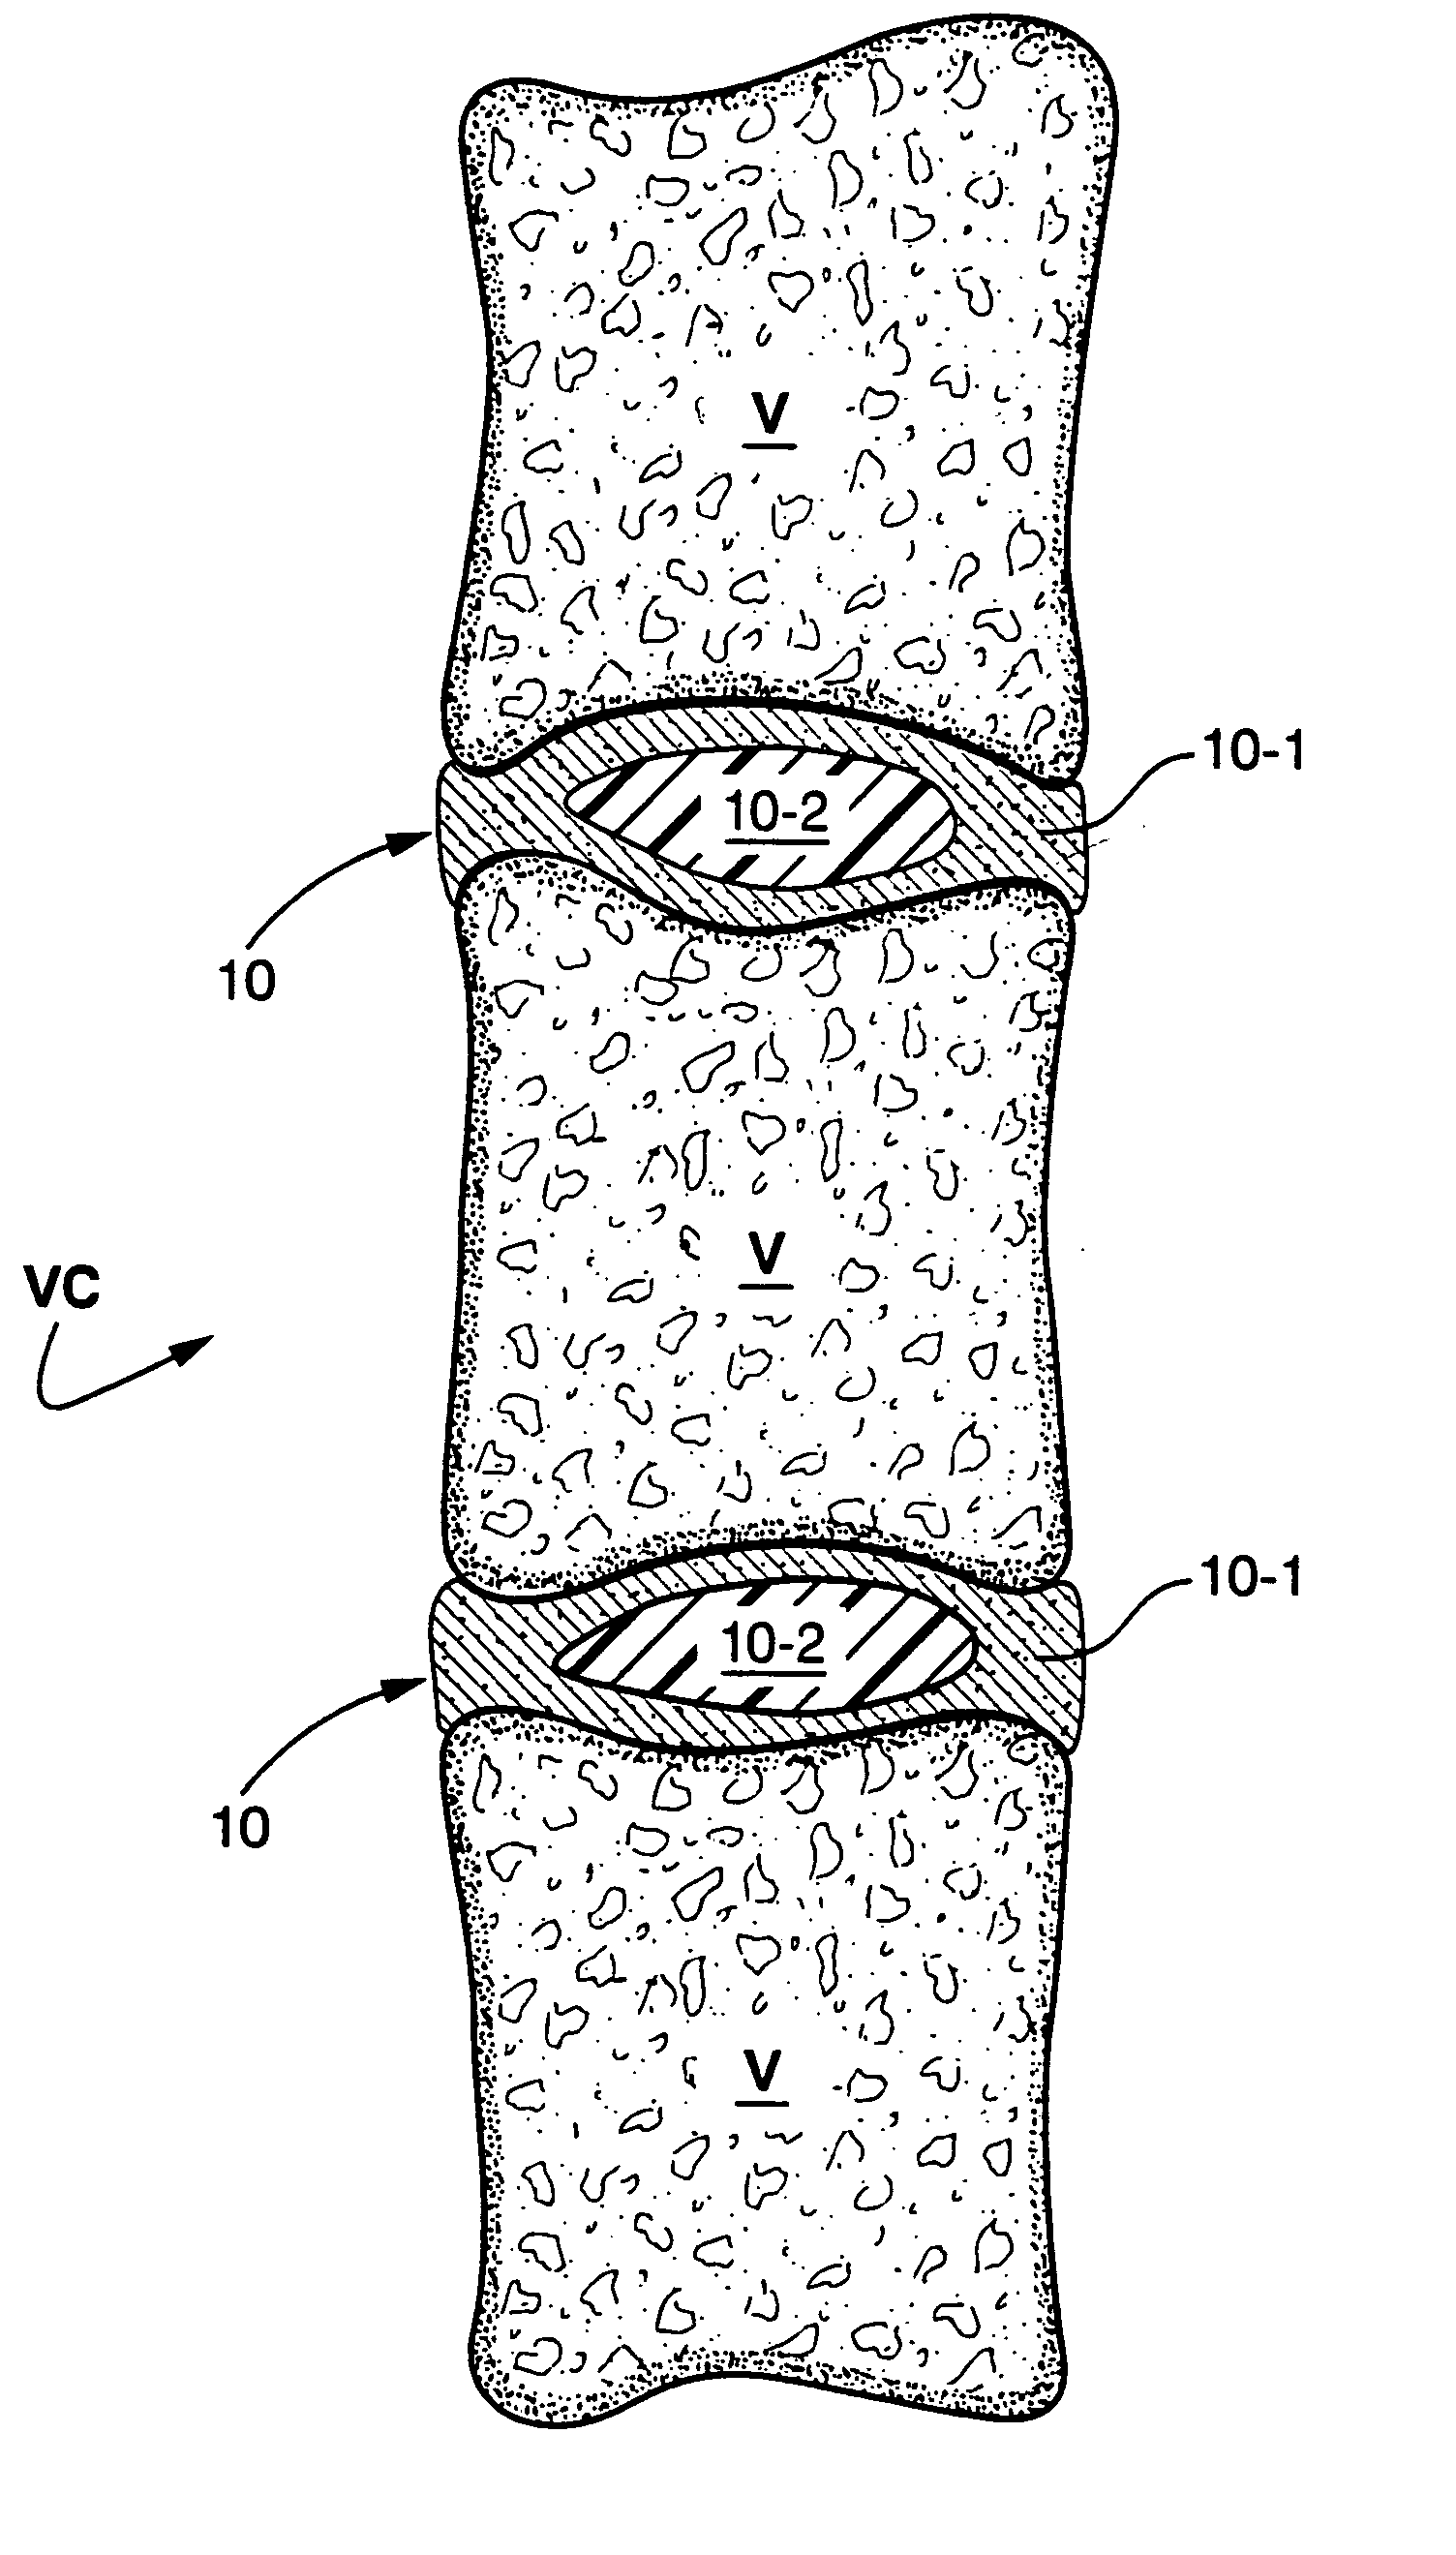 In situ bioprosthetic filler and methods, particularly for the in situ formation of vertebral disc bioprosthetics